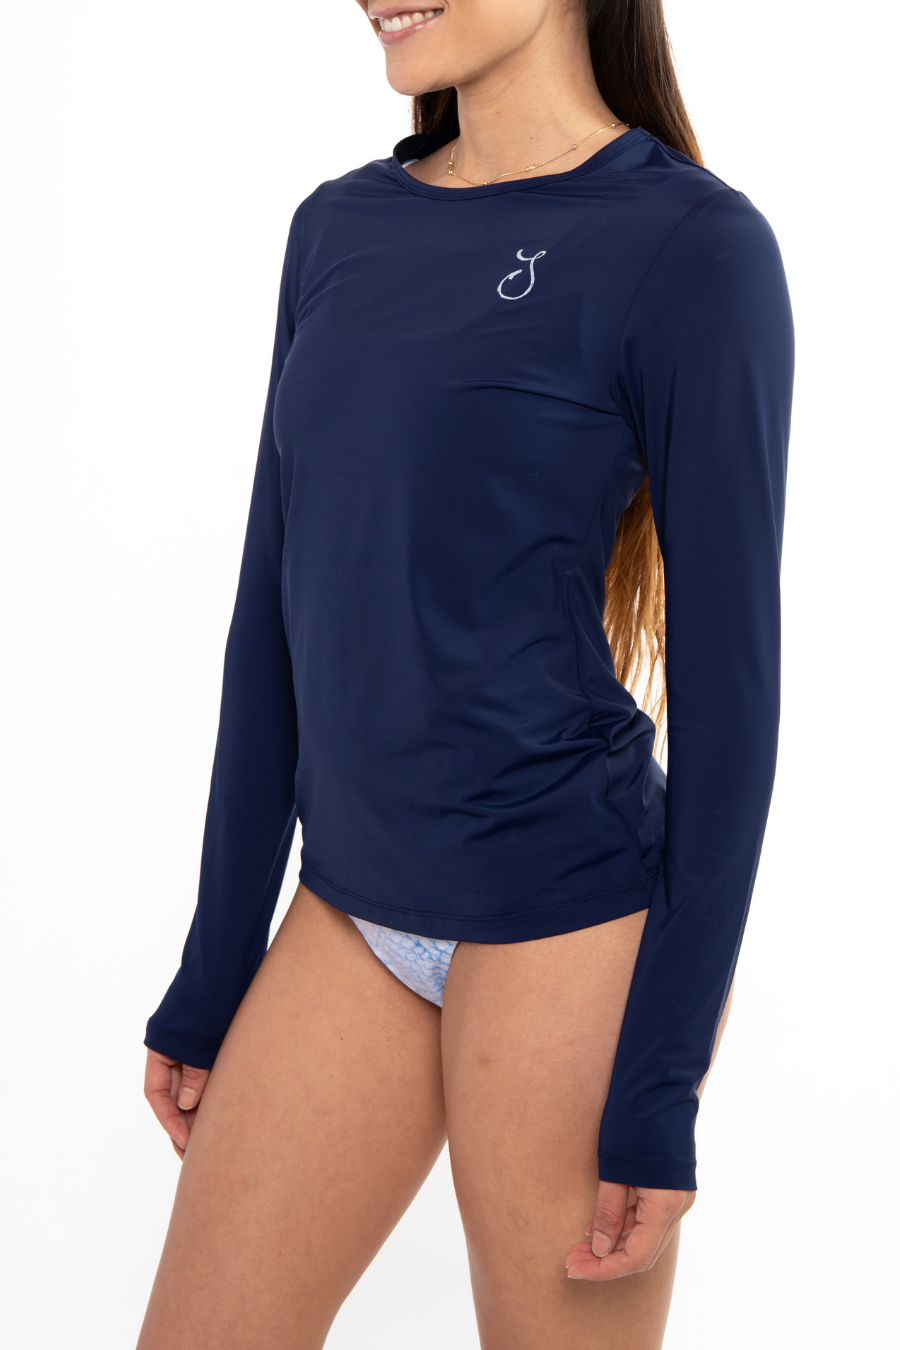 Classic Performance Top - Navy Blue